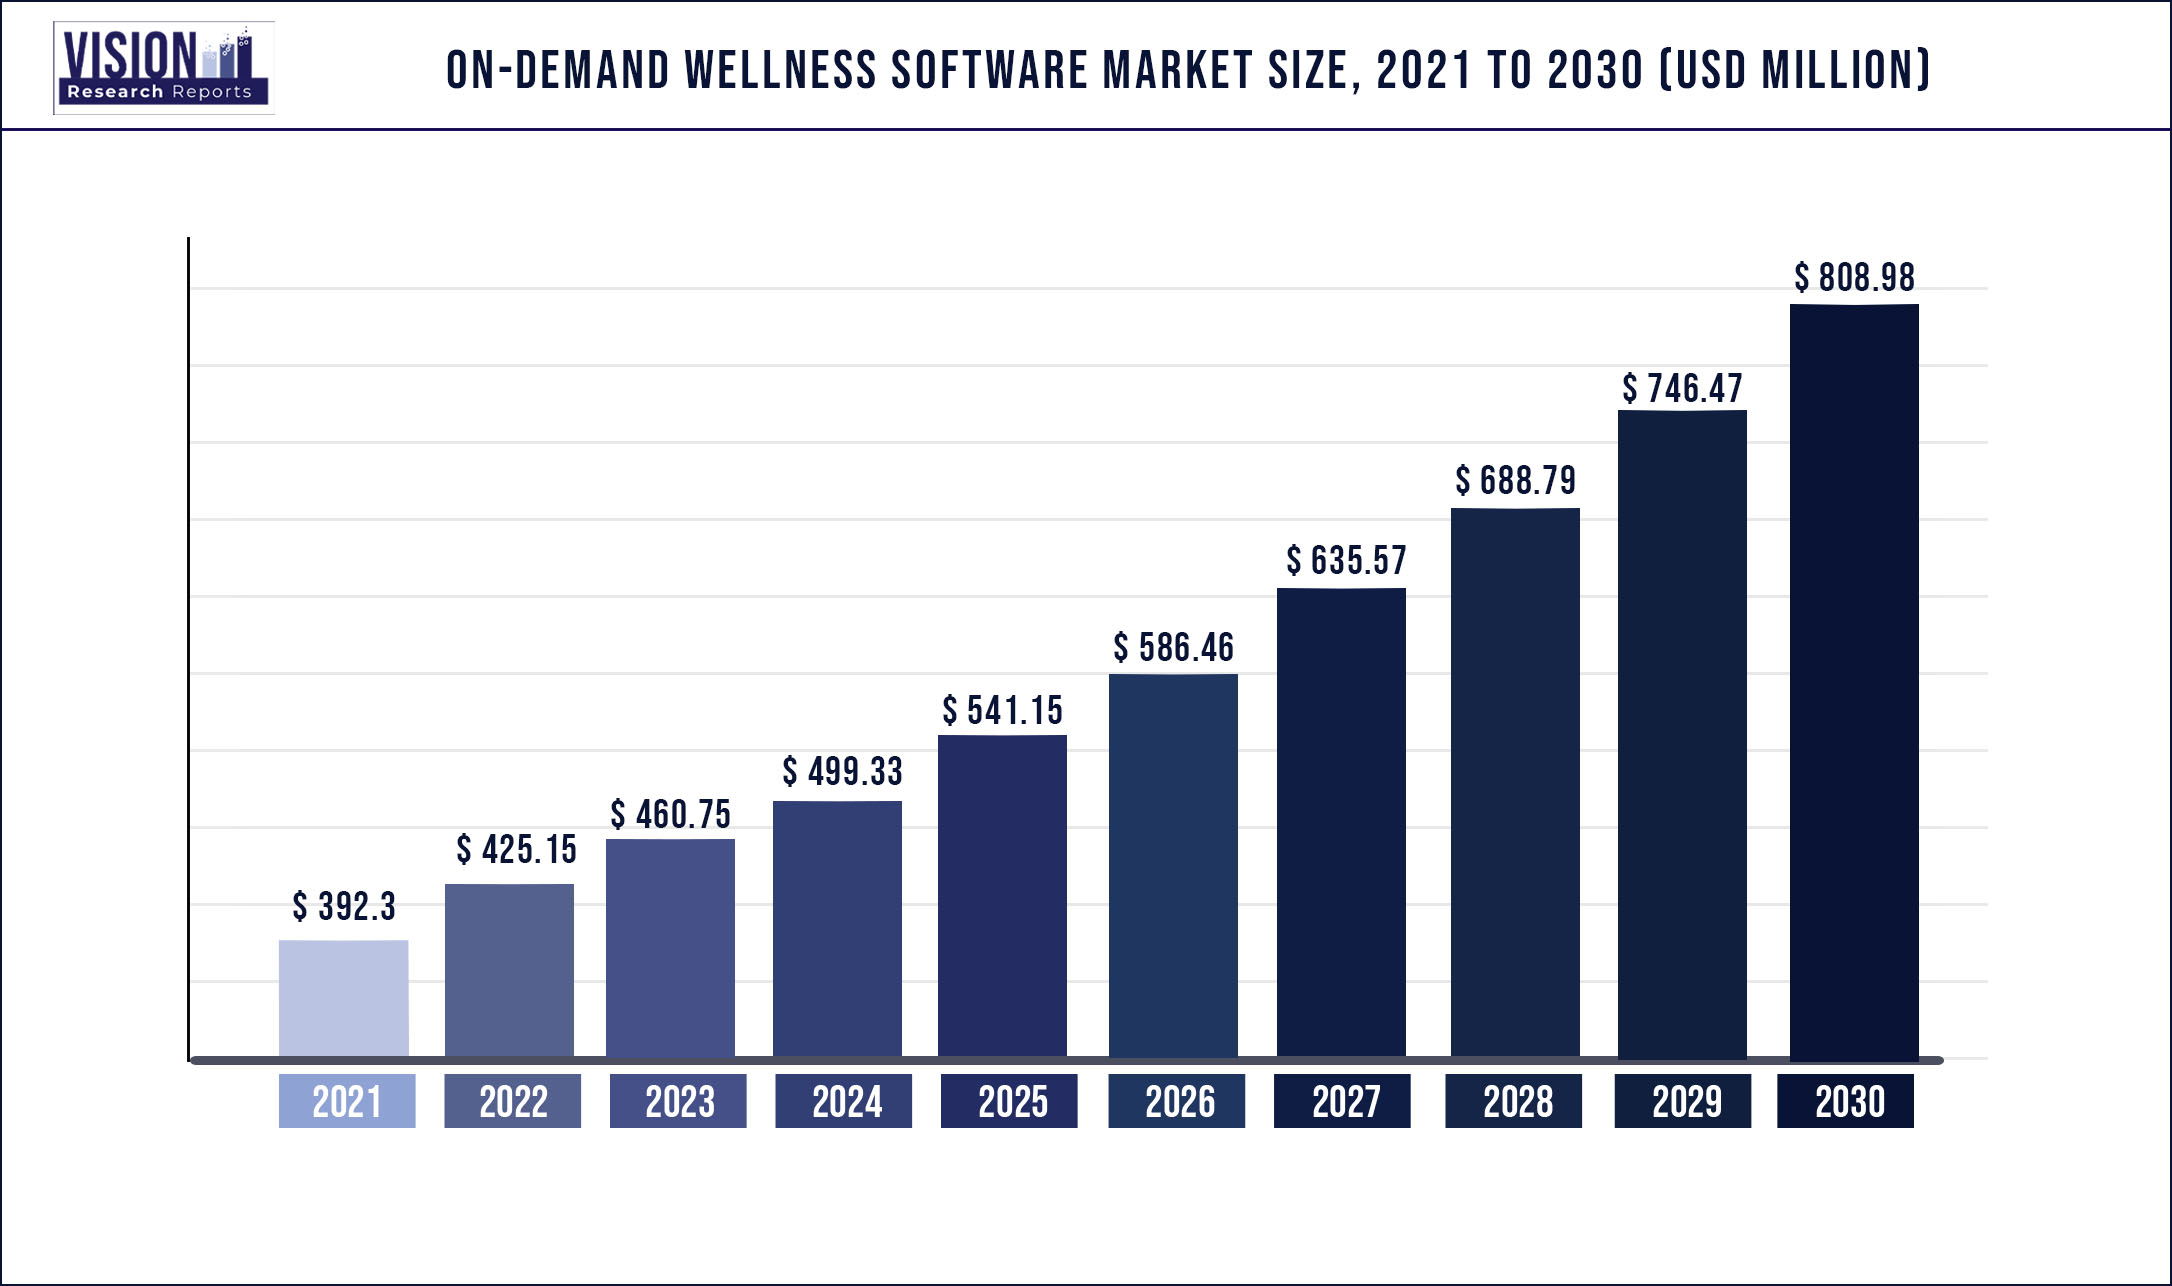 On-demand Wellness Software Market Size 2021 to 2030